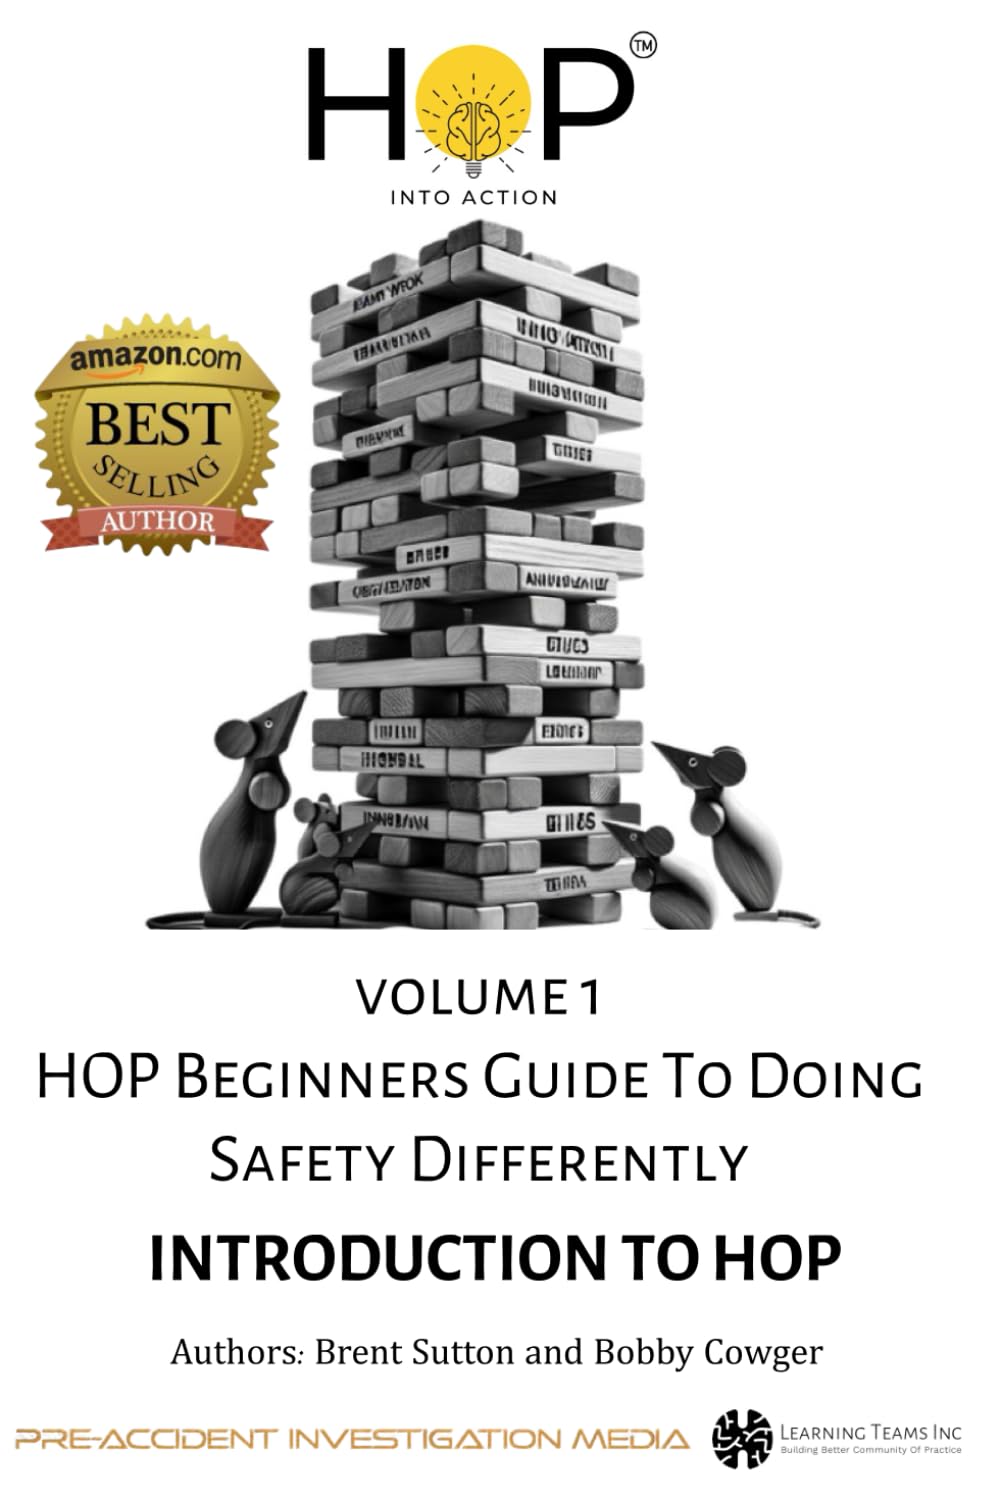 HOP Beginners Guide To Doing Safety Differently - Volume 1 - Introduction To HOP: HOP Into Action by Putting Human and Organizational Performance Principles Into Practice